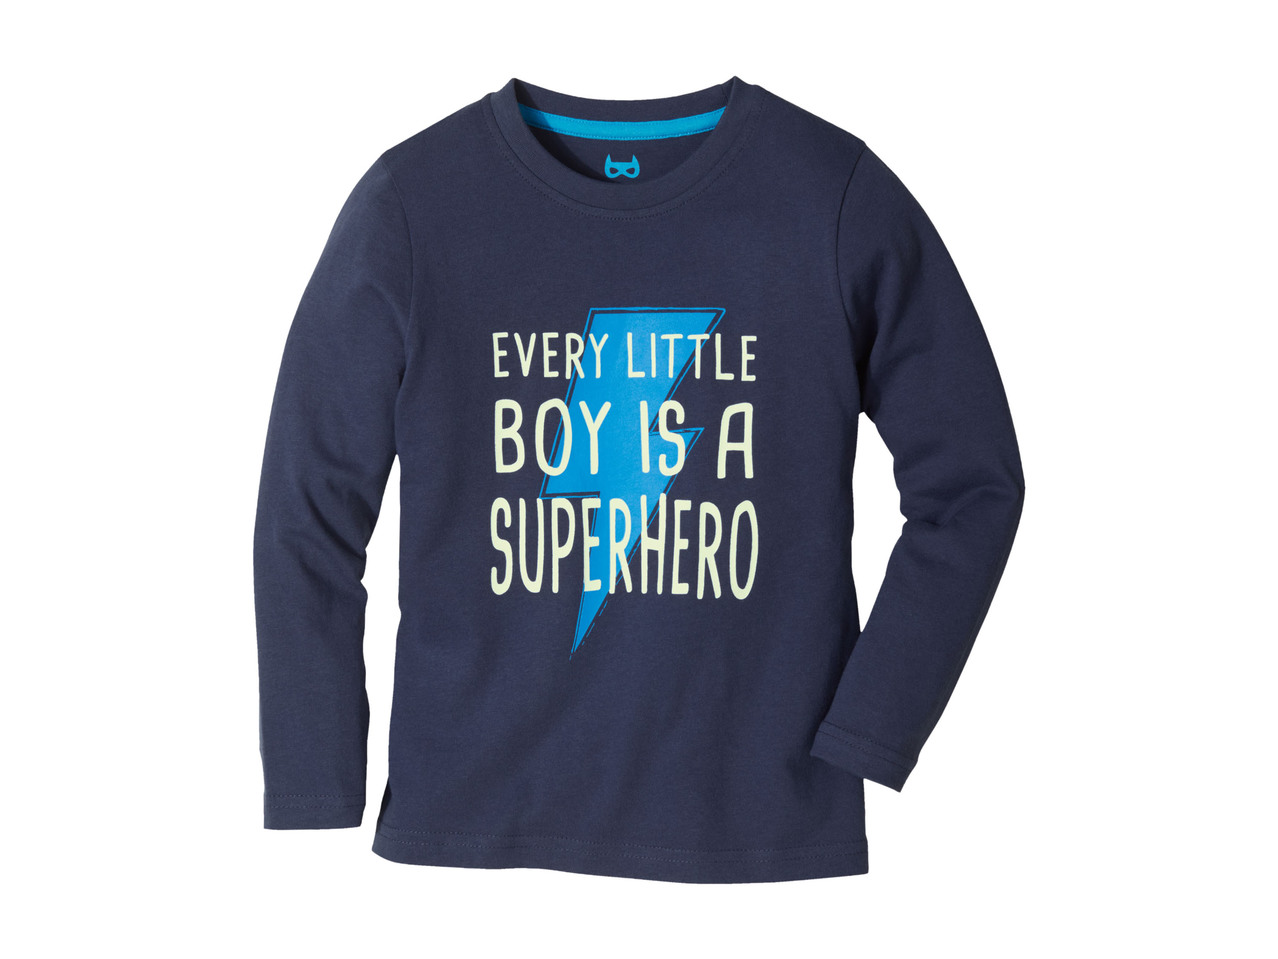 Boys' "Glow in the Dark" Long-Sleeved Tops, 2 pieces